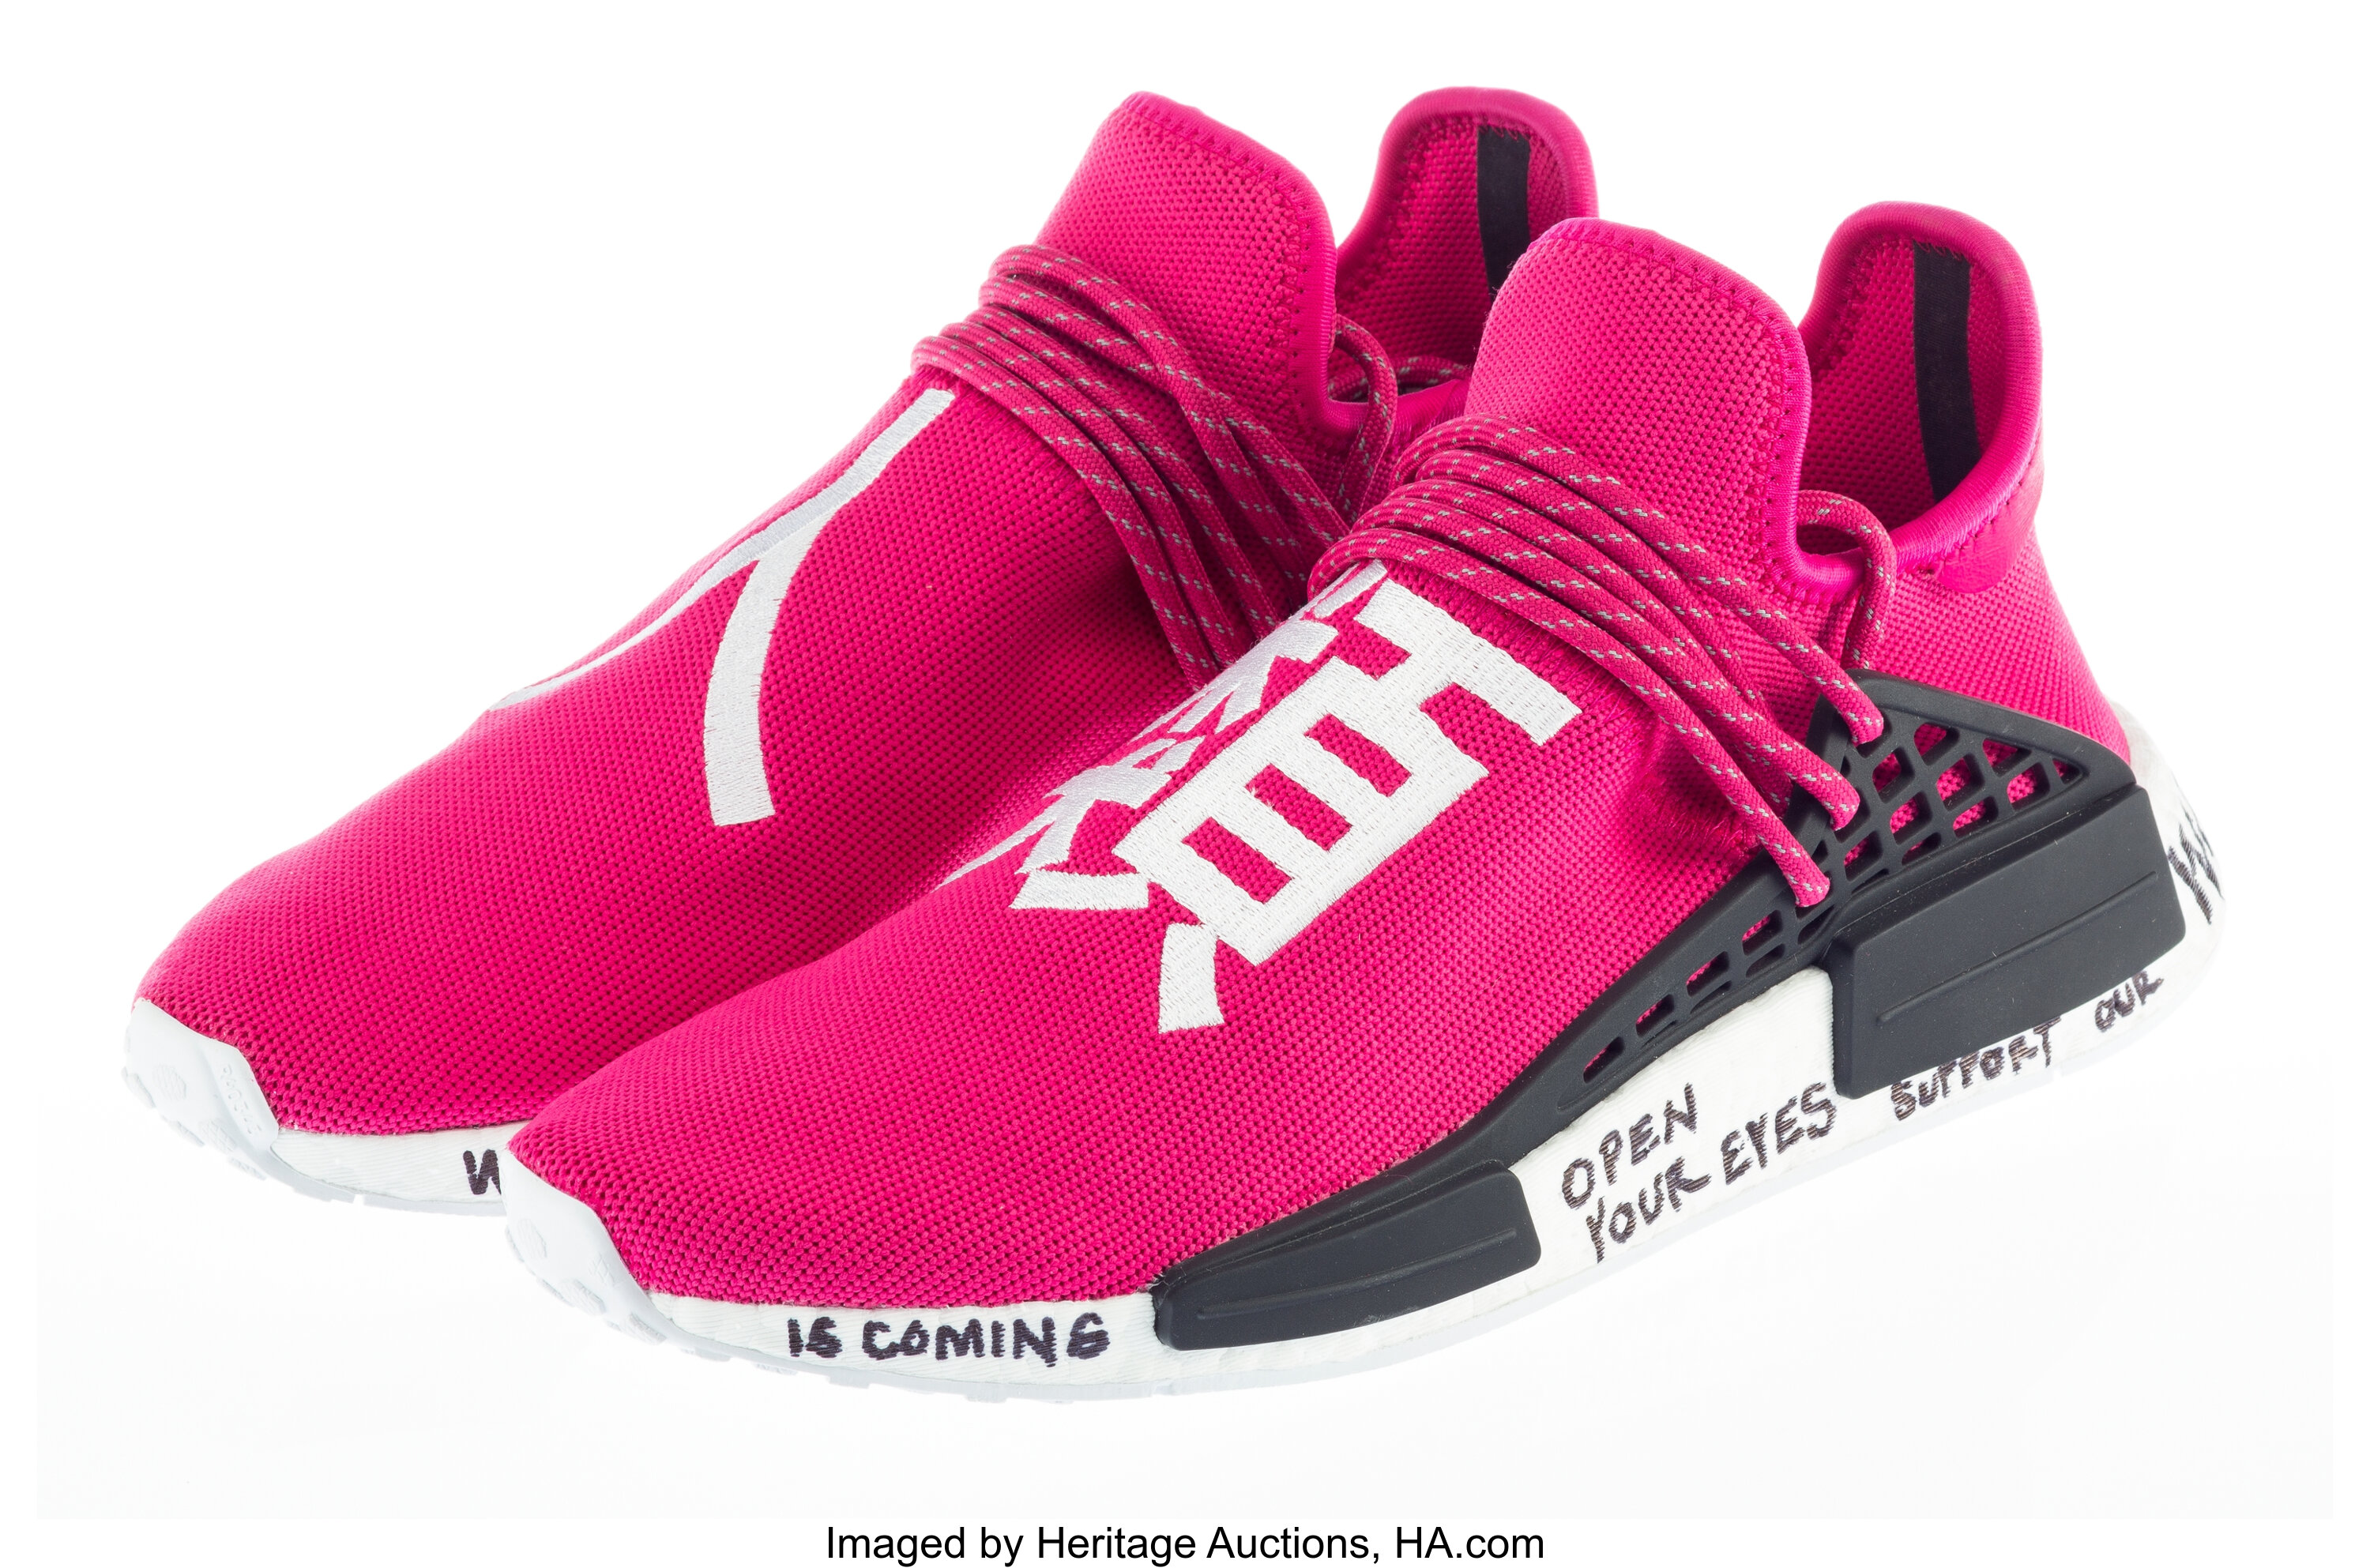 You Can Buy Pharrell's New Friends and Family NMDs for $5,000